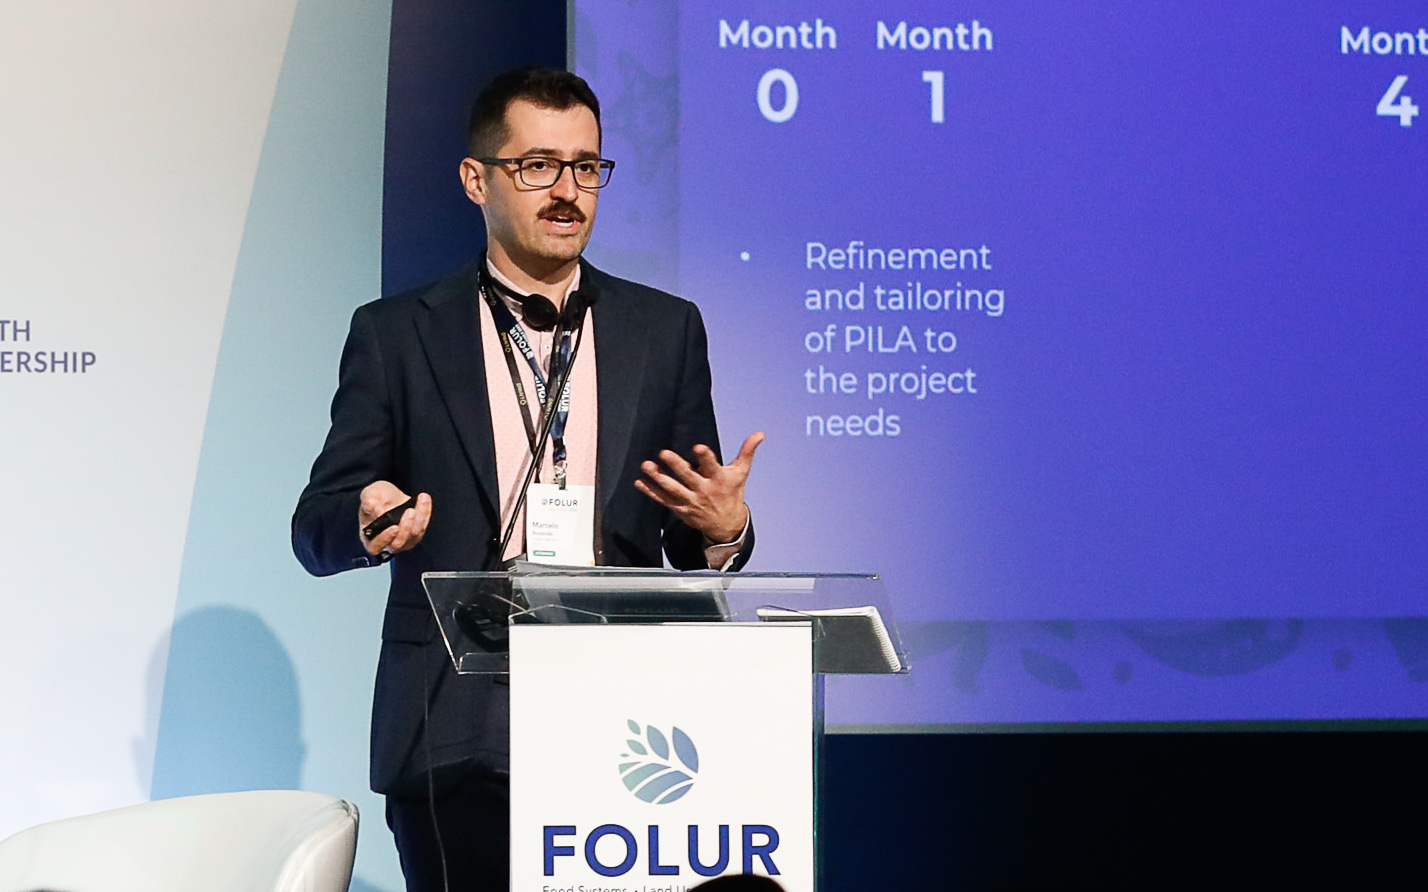 Marcelo Rezende, a natural resources officer with FAO, delivers a presentation at the FOLUR annual meeting in Sao Paulo